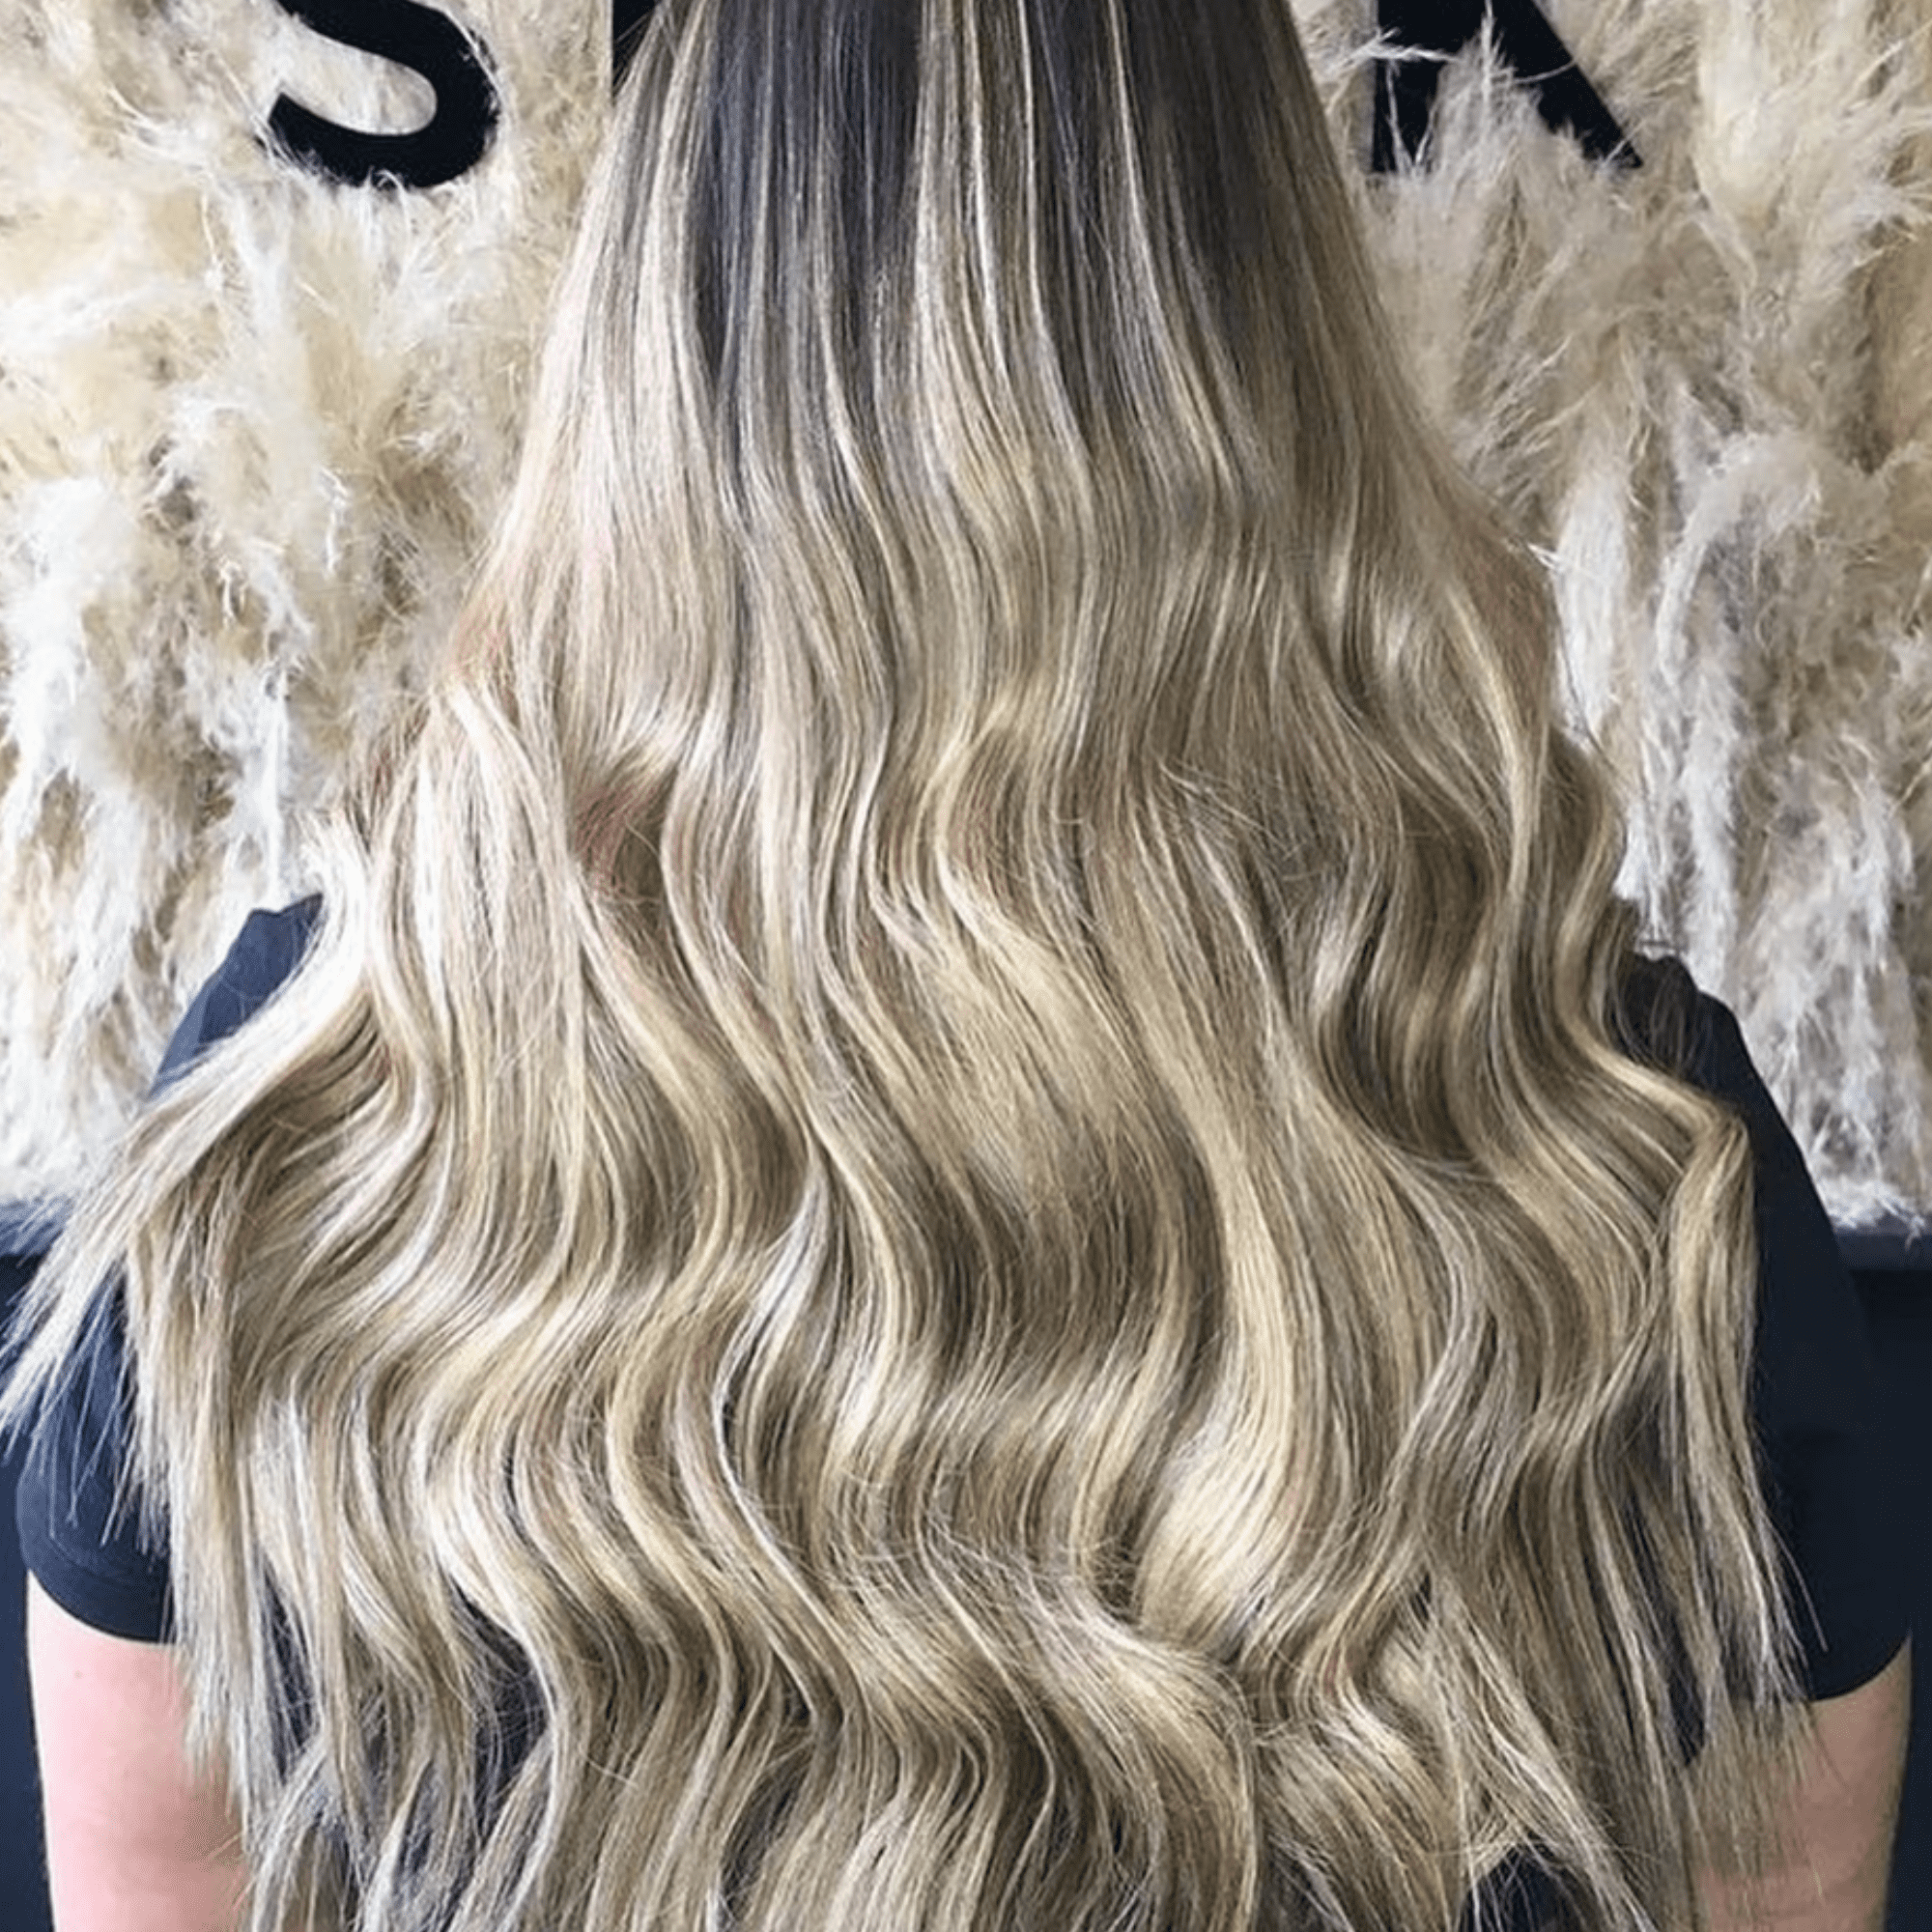 14" Invisible Tape Extensions Rooted Coachella